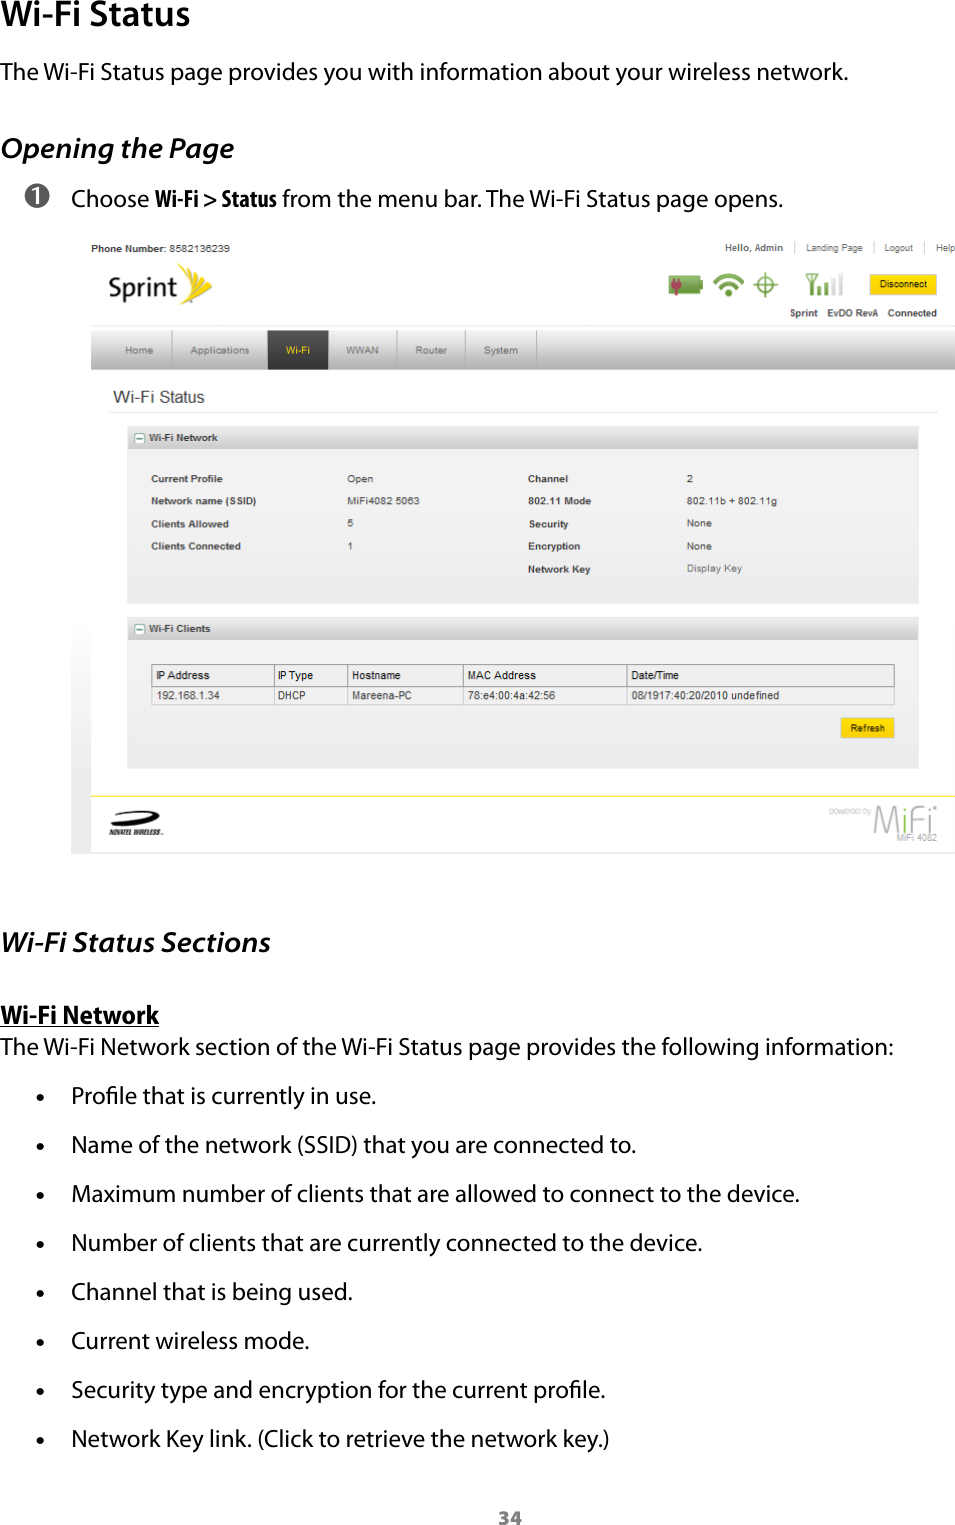 34Wi-Fi StatusThe Wi-Fi Status page provides you with information about your wireless network.Opening the Page ➊ Choose Wi-Fi &gt; Status from the menu bar. The Wi-Fi Status page opens.Wi-Fi Status SectionsWi-Fi NetworkThe Wi-Fi Network section of the Wi-Fi Status page provides the following information: •Prole that is currently in use. •Name of the network (SSID) that you are connected to. •Maximum number of clients that are allowed to connect to the device.  •Number of clients that are currently connected to the device. •Channel that is being used. •Current wireless mode. •Security type and encryption for the current prole. •Network Key link. (Click to retrieve the network key.)